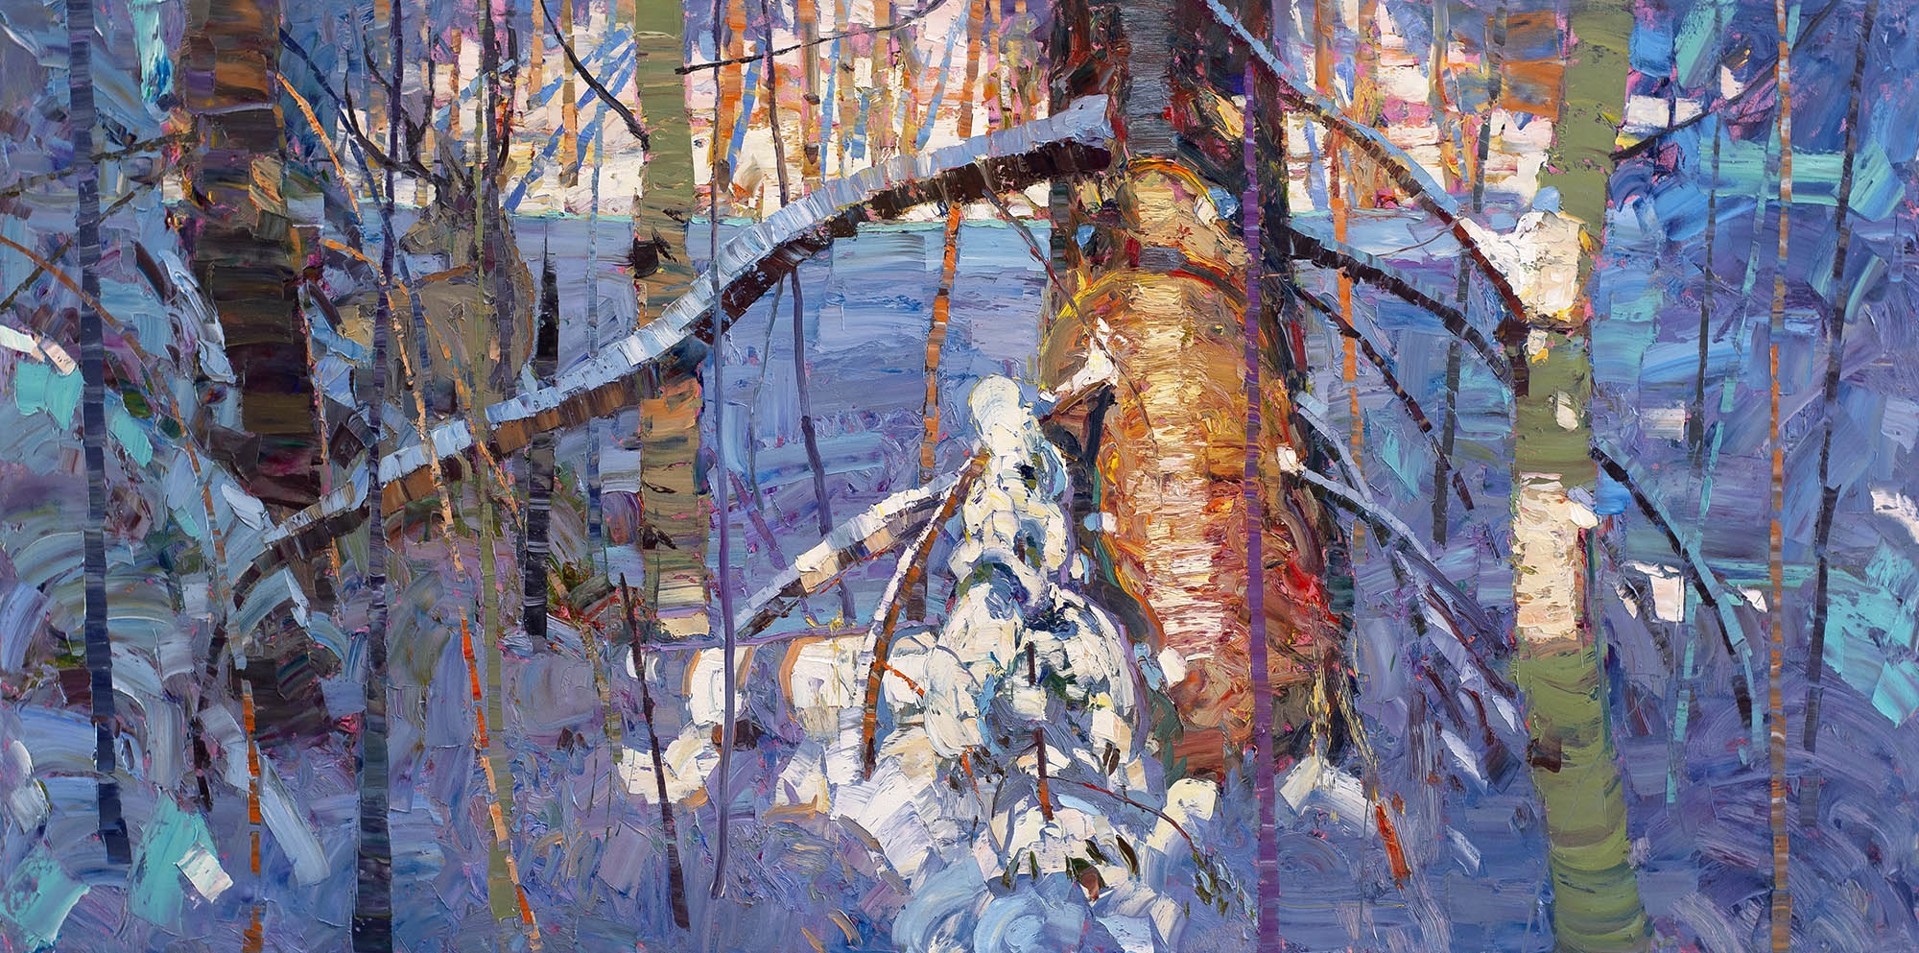 Original Oil Painting By Silas Thompson Featuring A Winter Landscape With Snow Covered Trees In Blues And Purples